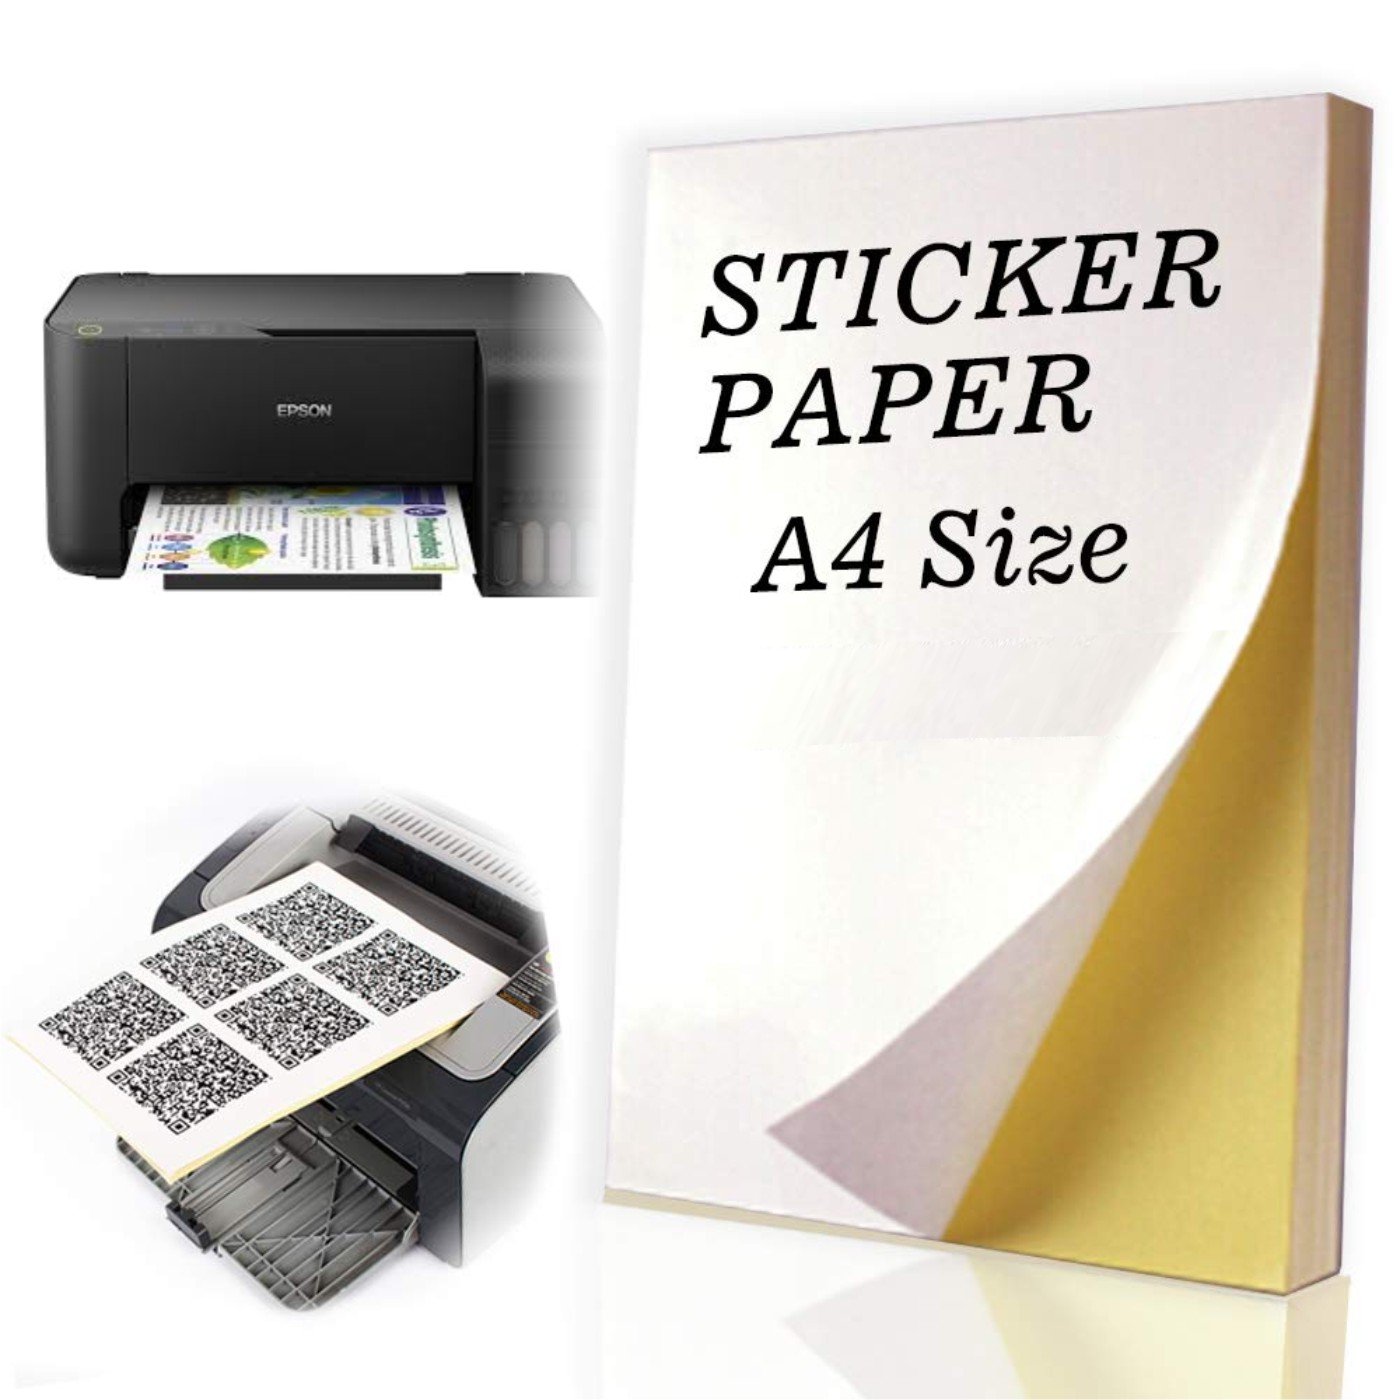 Magicdo Sticker Paper Glossy 100 Sheets Full Sheet Label A4 Self Adhesive Shipping Labels For 